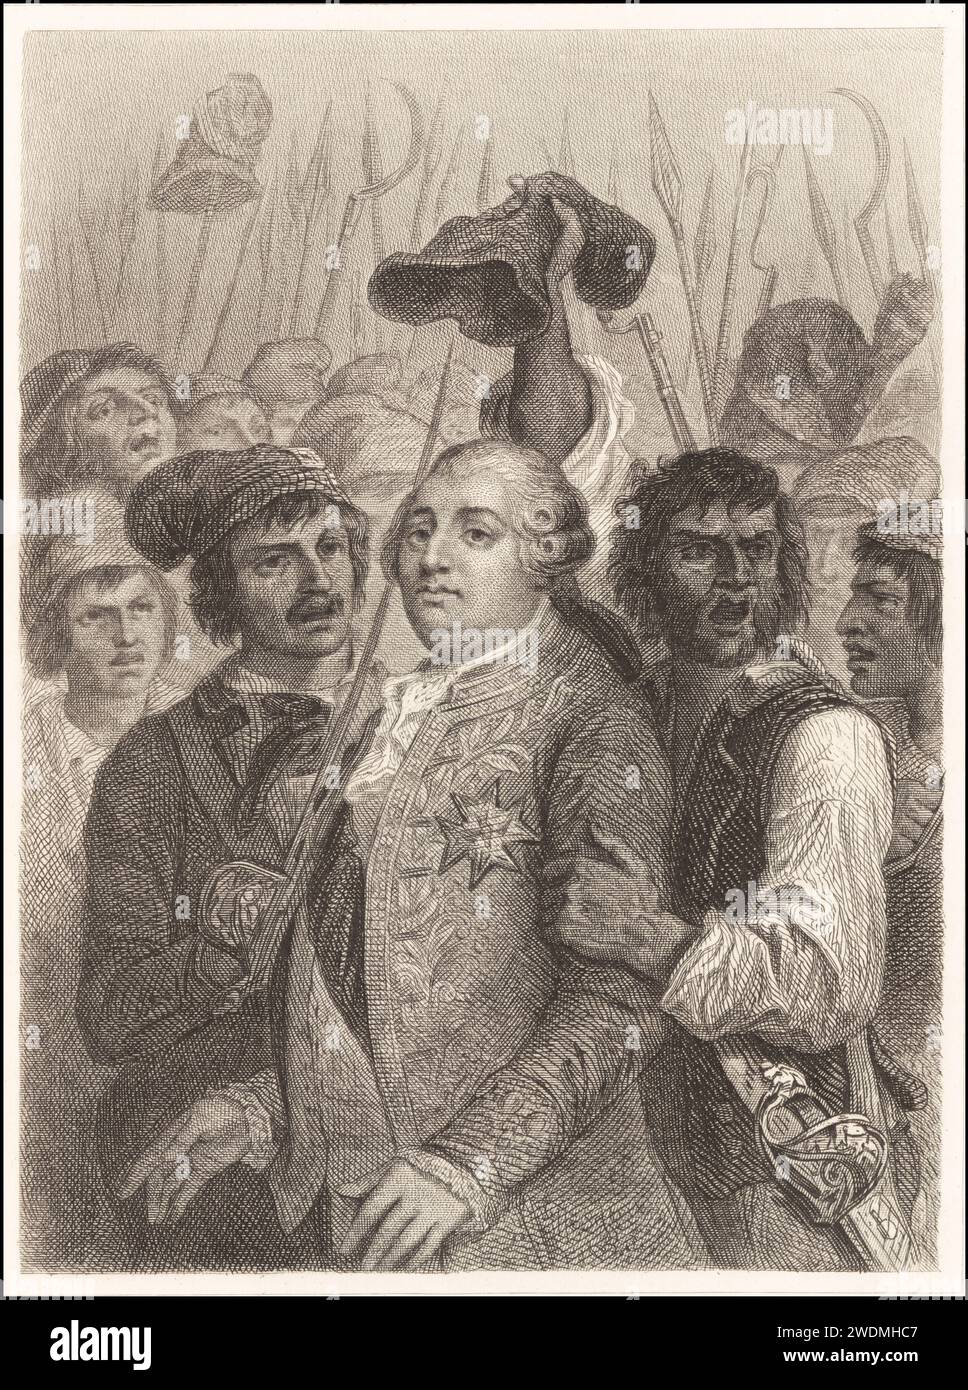 Arrest of Louis XVI of France The people at the Tuileries Palace in Paris, France, on 20 June 1792 with Louis XVI of France. Drawn by Denis Auguste Marie Raffet, engraved by Burdet. Illustration for Histoire De La Revolution Francaise by M A Thiers (Furne, Jouvet et Cie, 1880).France / Europe / Louis XVI king of France (1754-1793) / house of Bourbon (France) /  histoire de la revolution francaise / french revolution / tuileries palace / paris Stock Photo